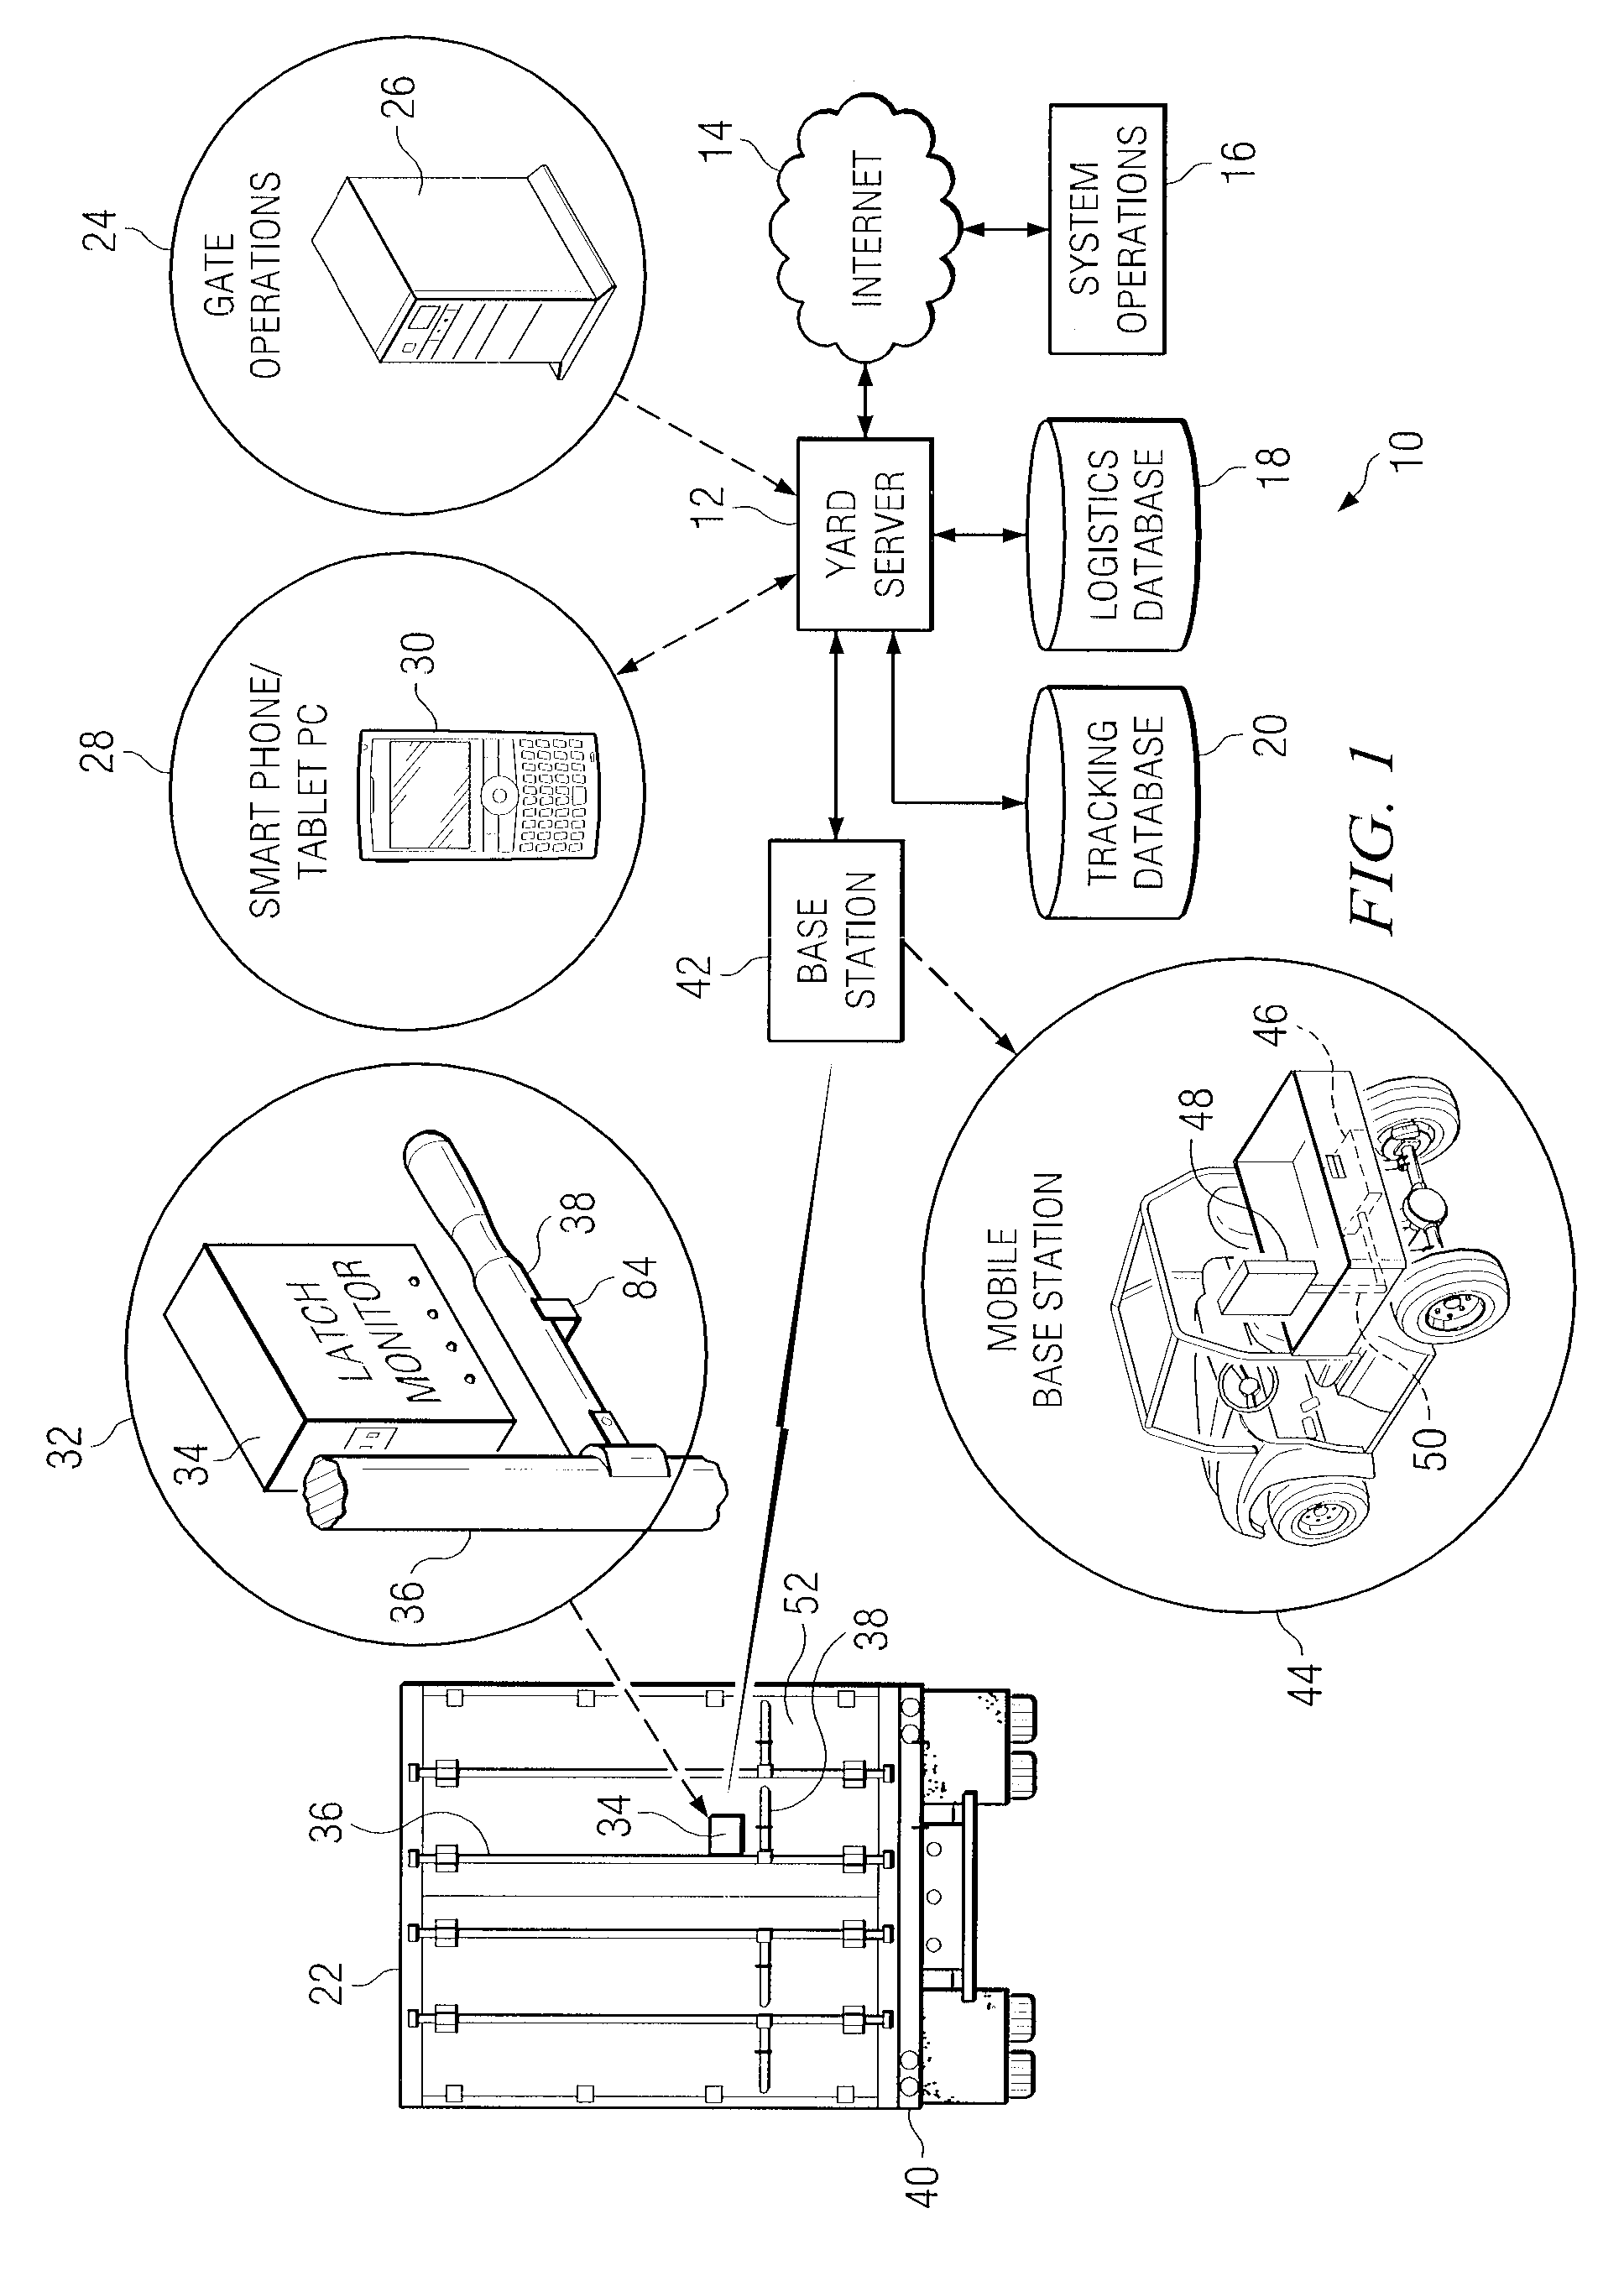 Latch Monitoring Apparatus for a Shipping Container Door